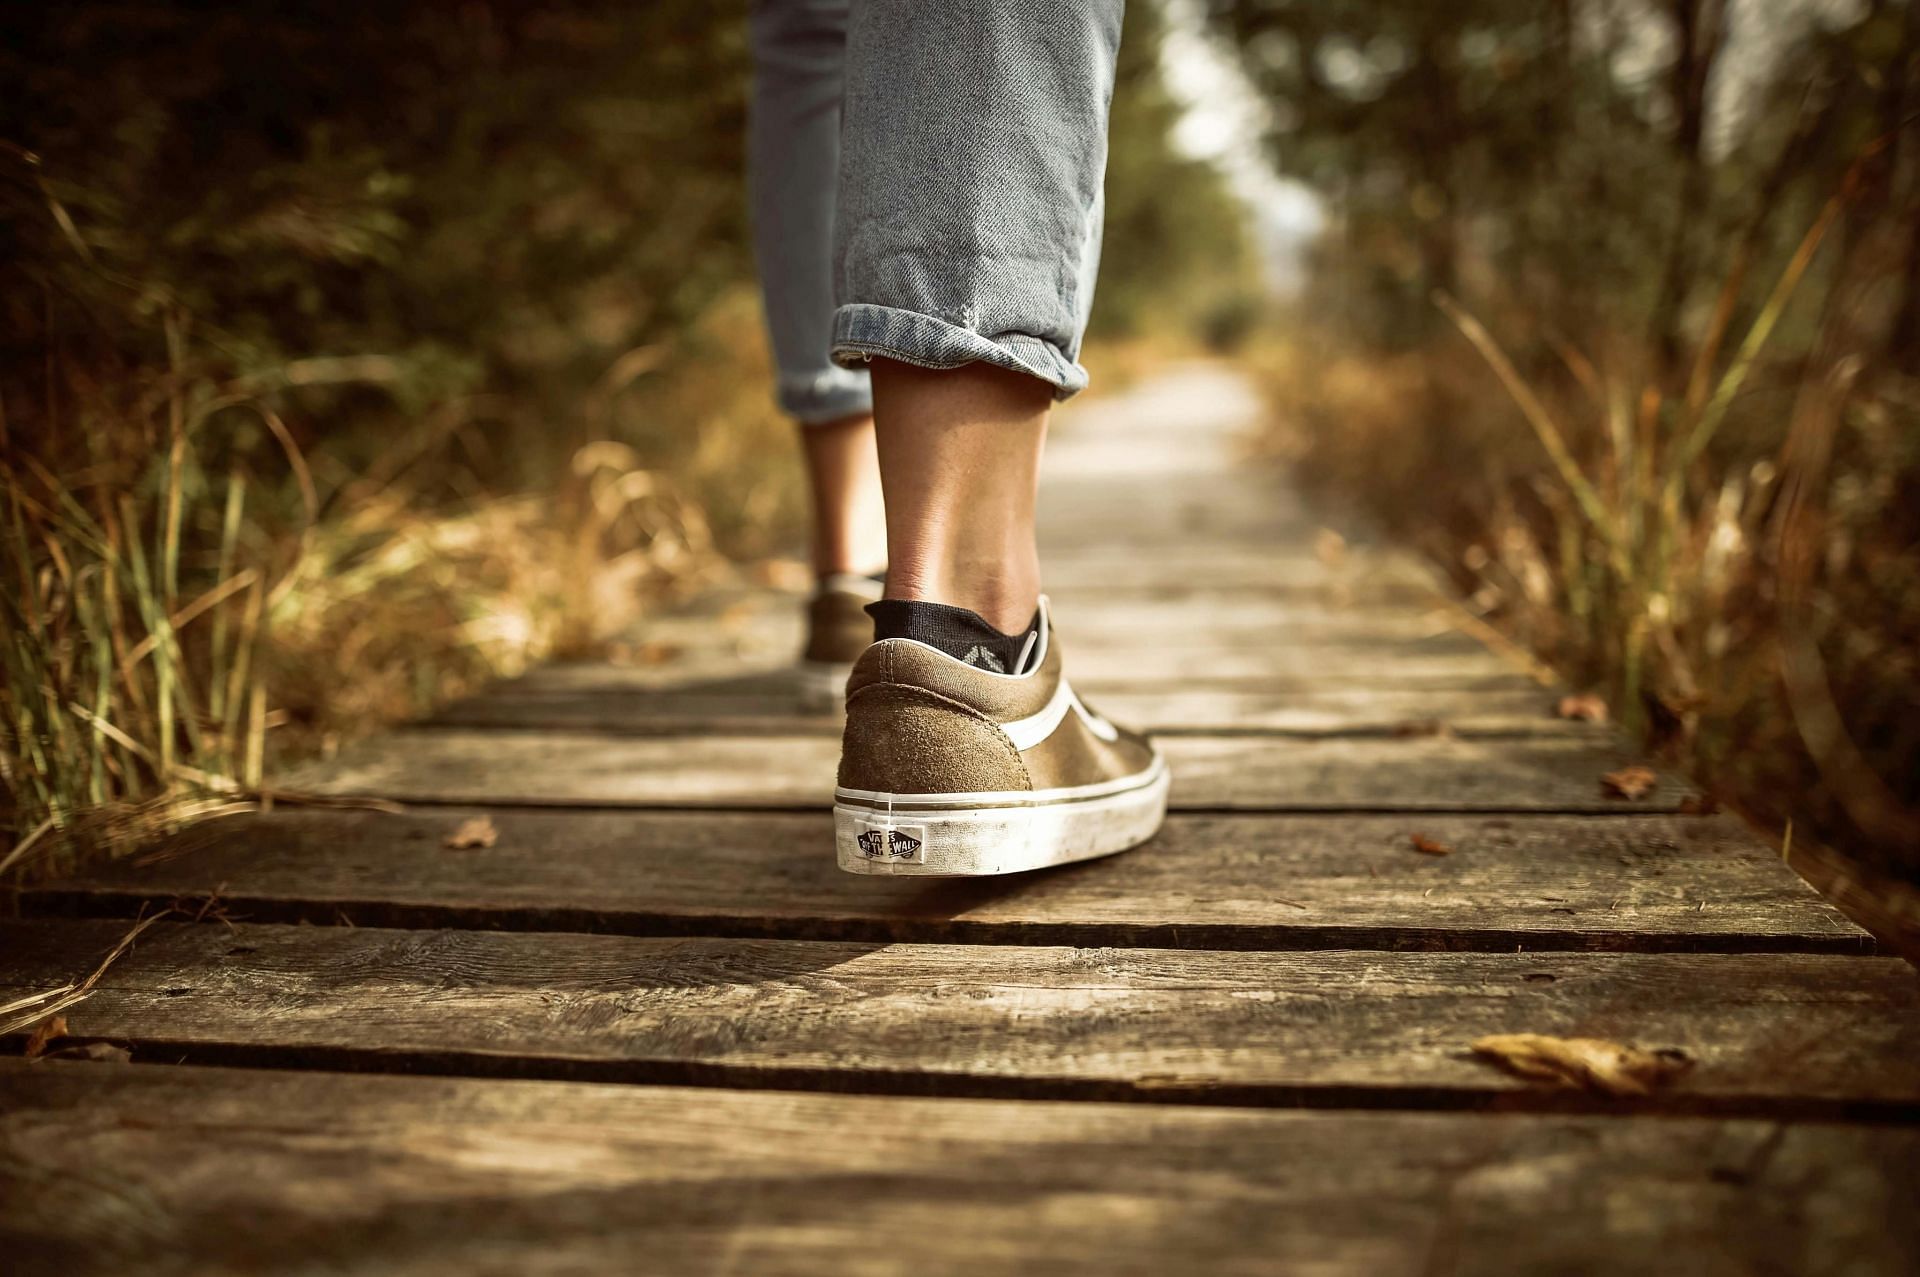 Tips to get rid of swollen ankles (image sourced via Pexels / Photo by tobi)